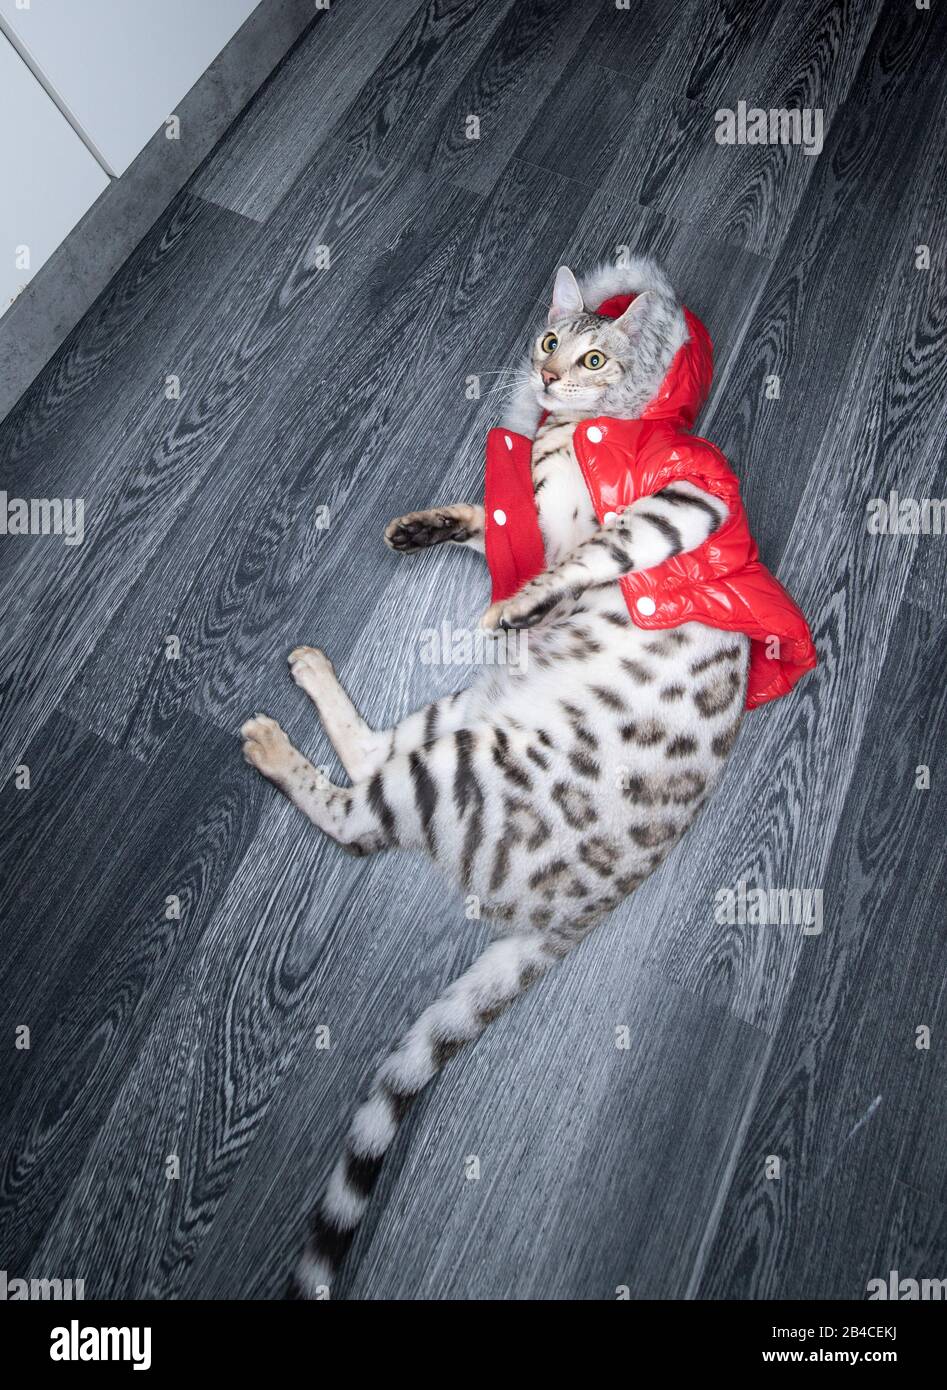 Cat wearing coat Stock Photo by ©willeecole 19448595